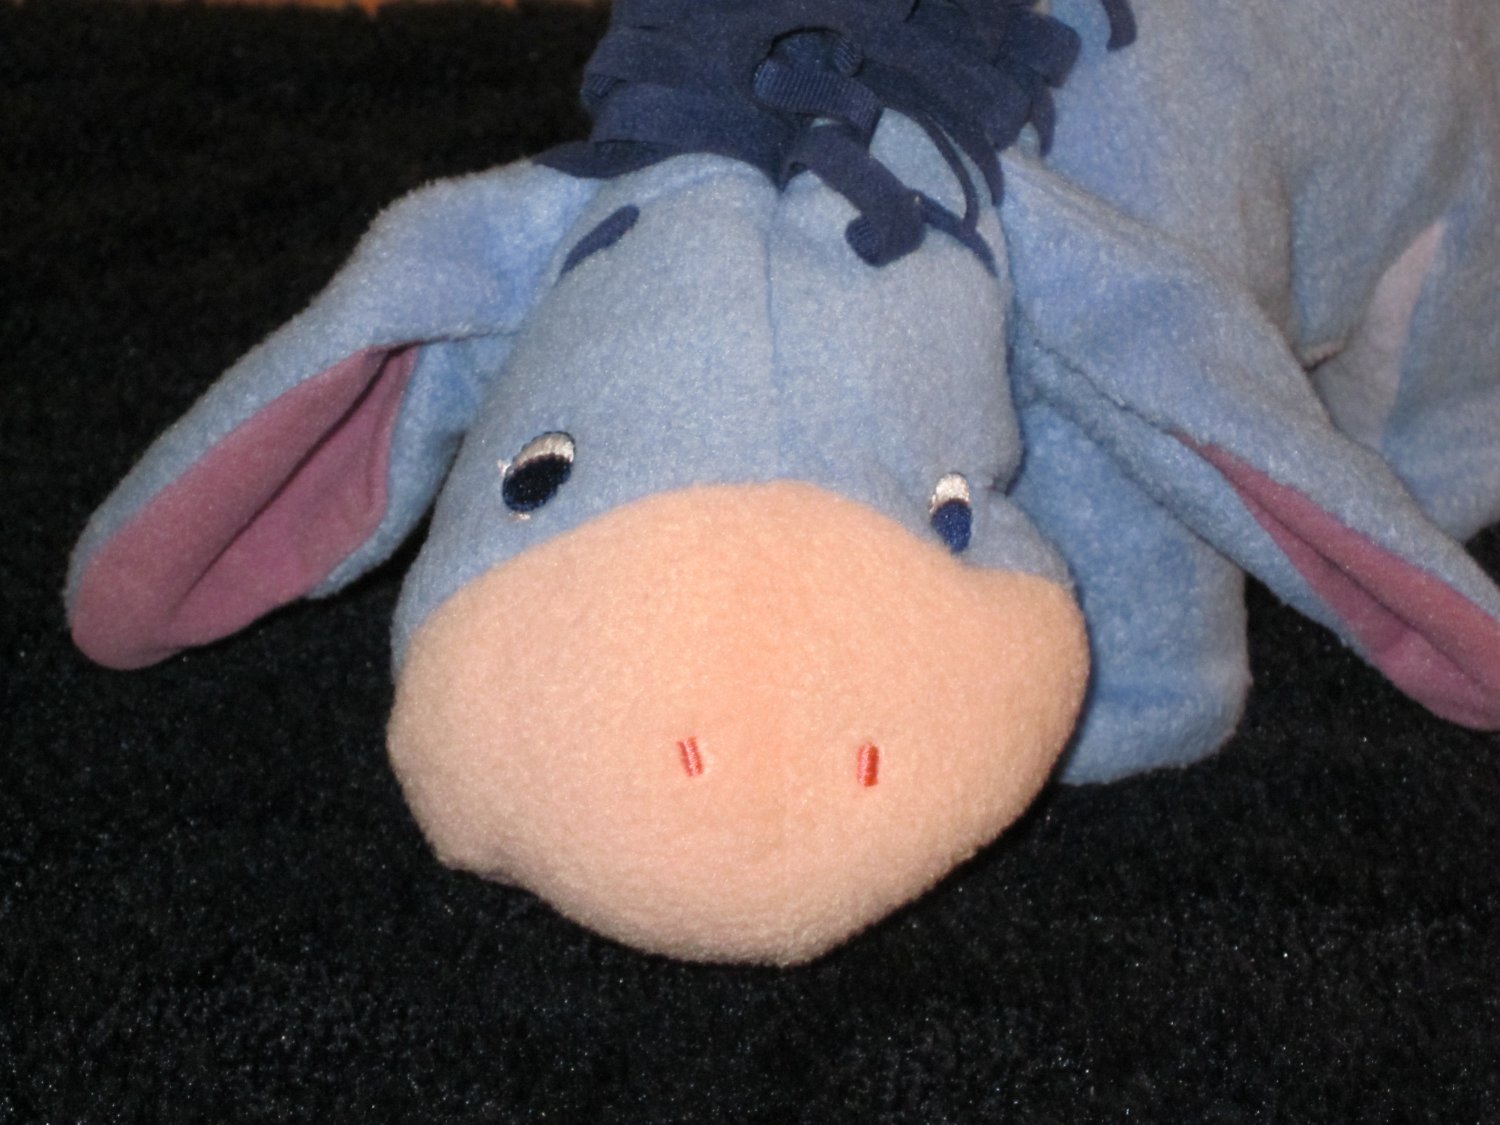 Fisher Price Magic Touch 'n Crawl Plush Eeyore from Winnie the Pooh